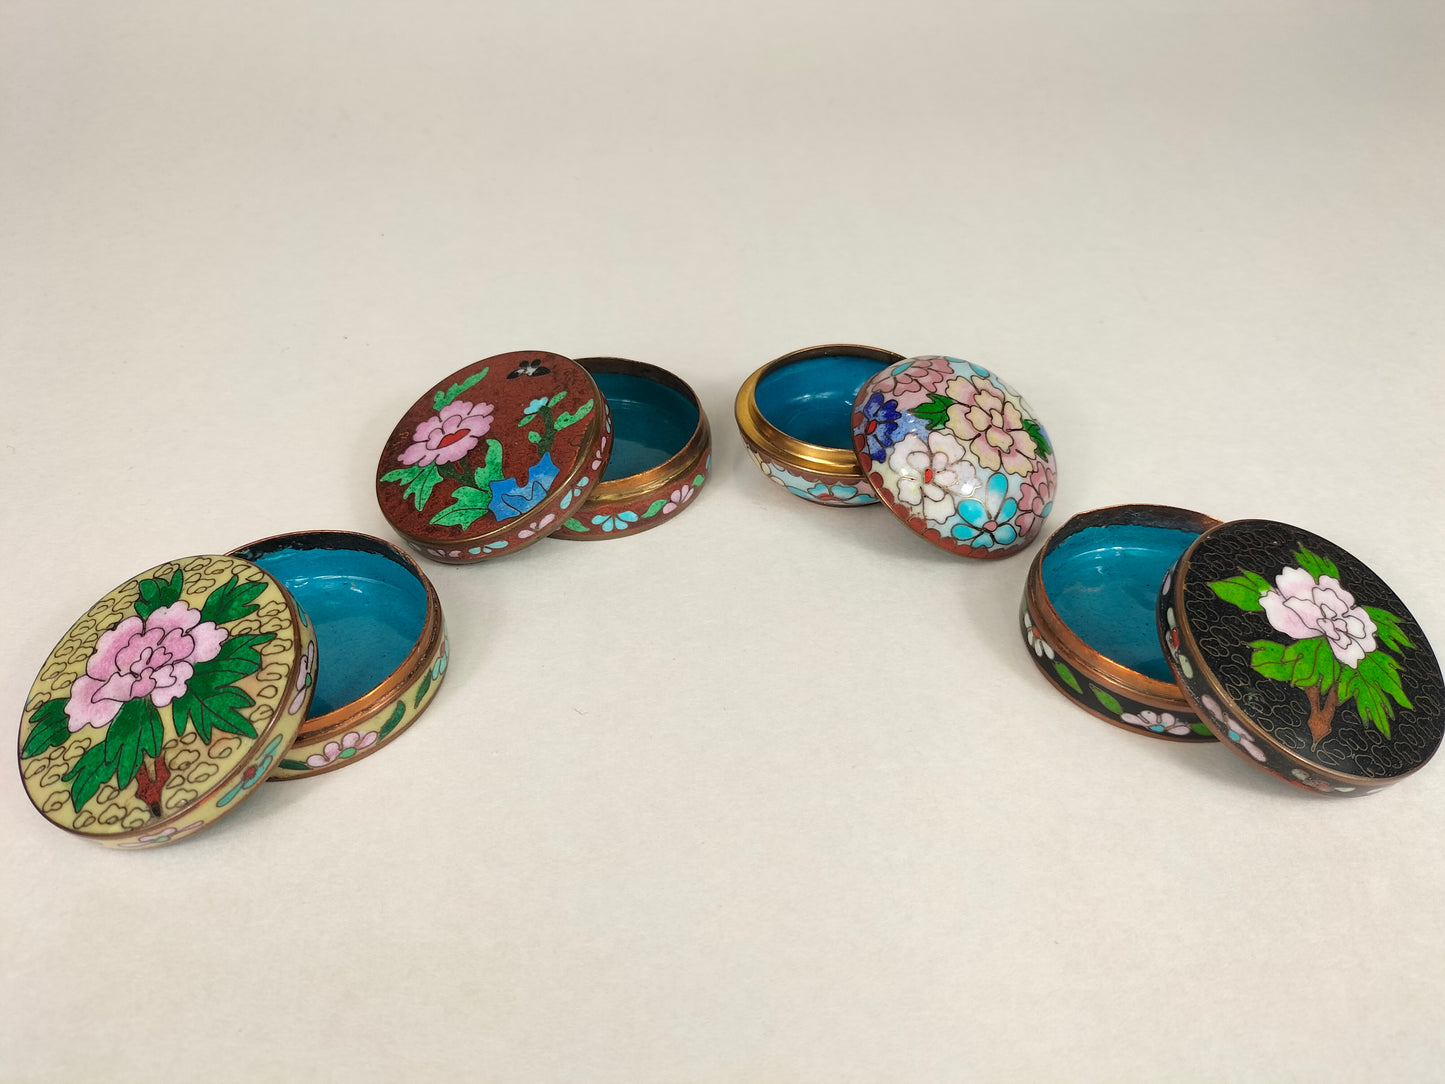 A set of 4 Chinese cloisonne jewelry boxes decorated with floral motifs // 20th century